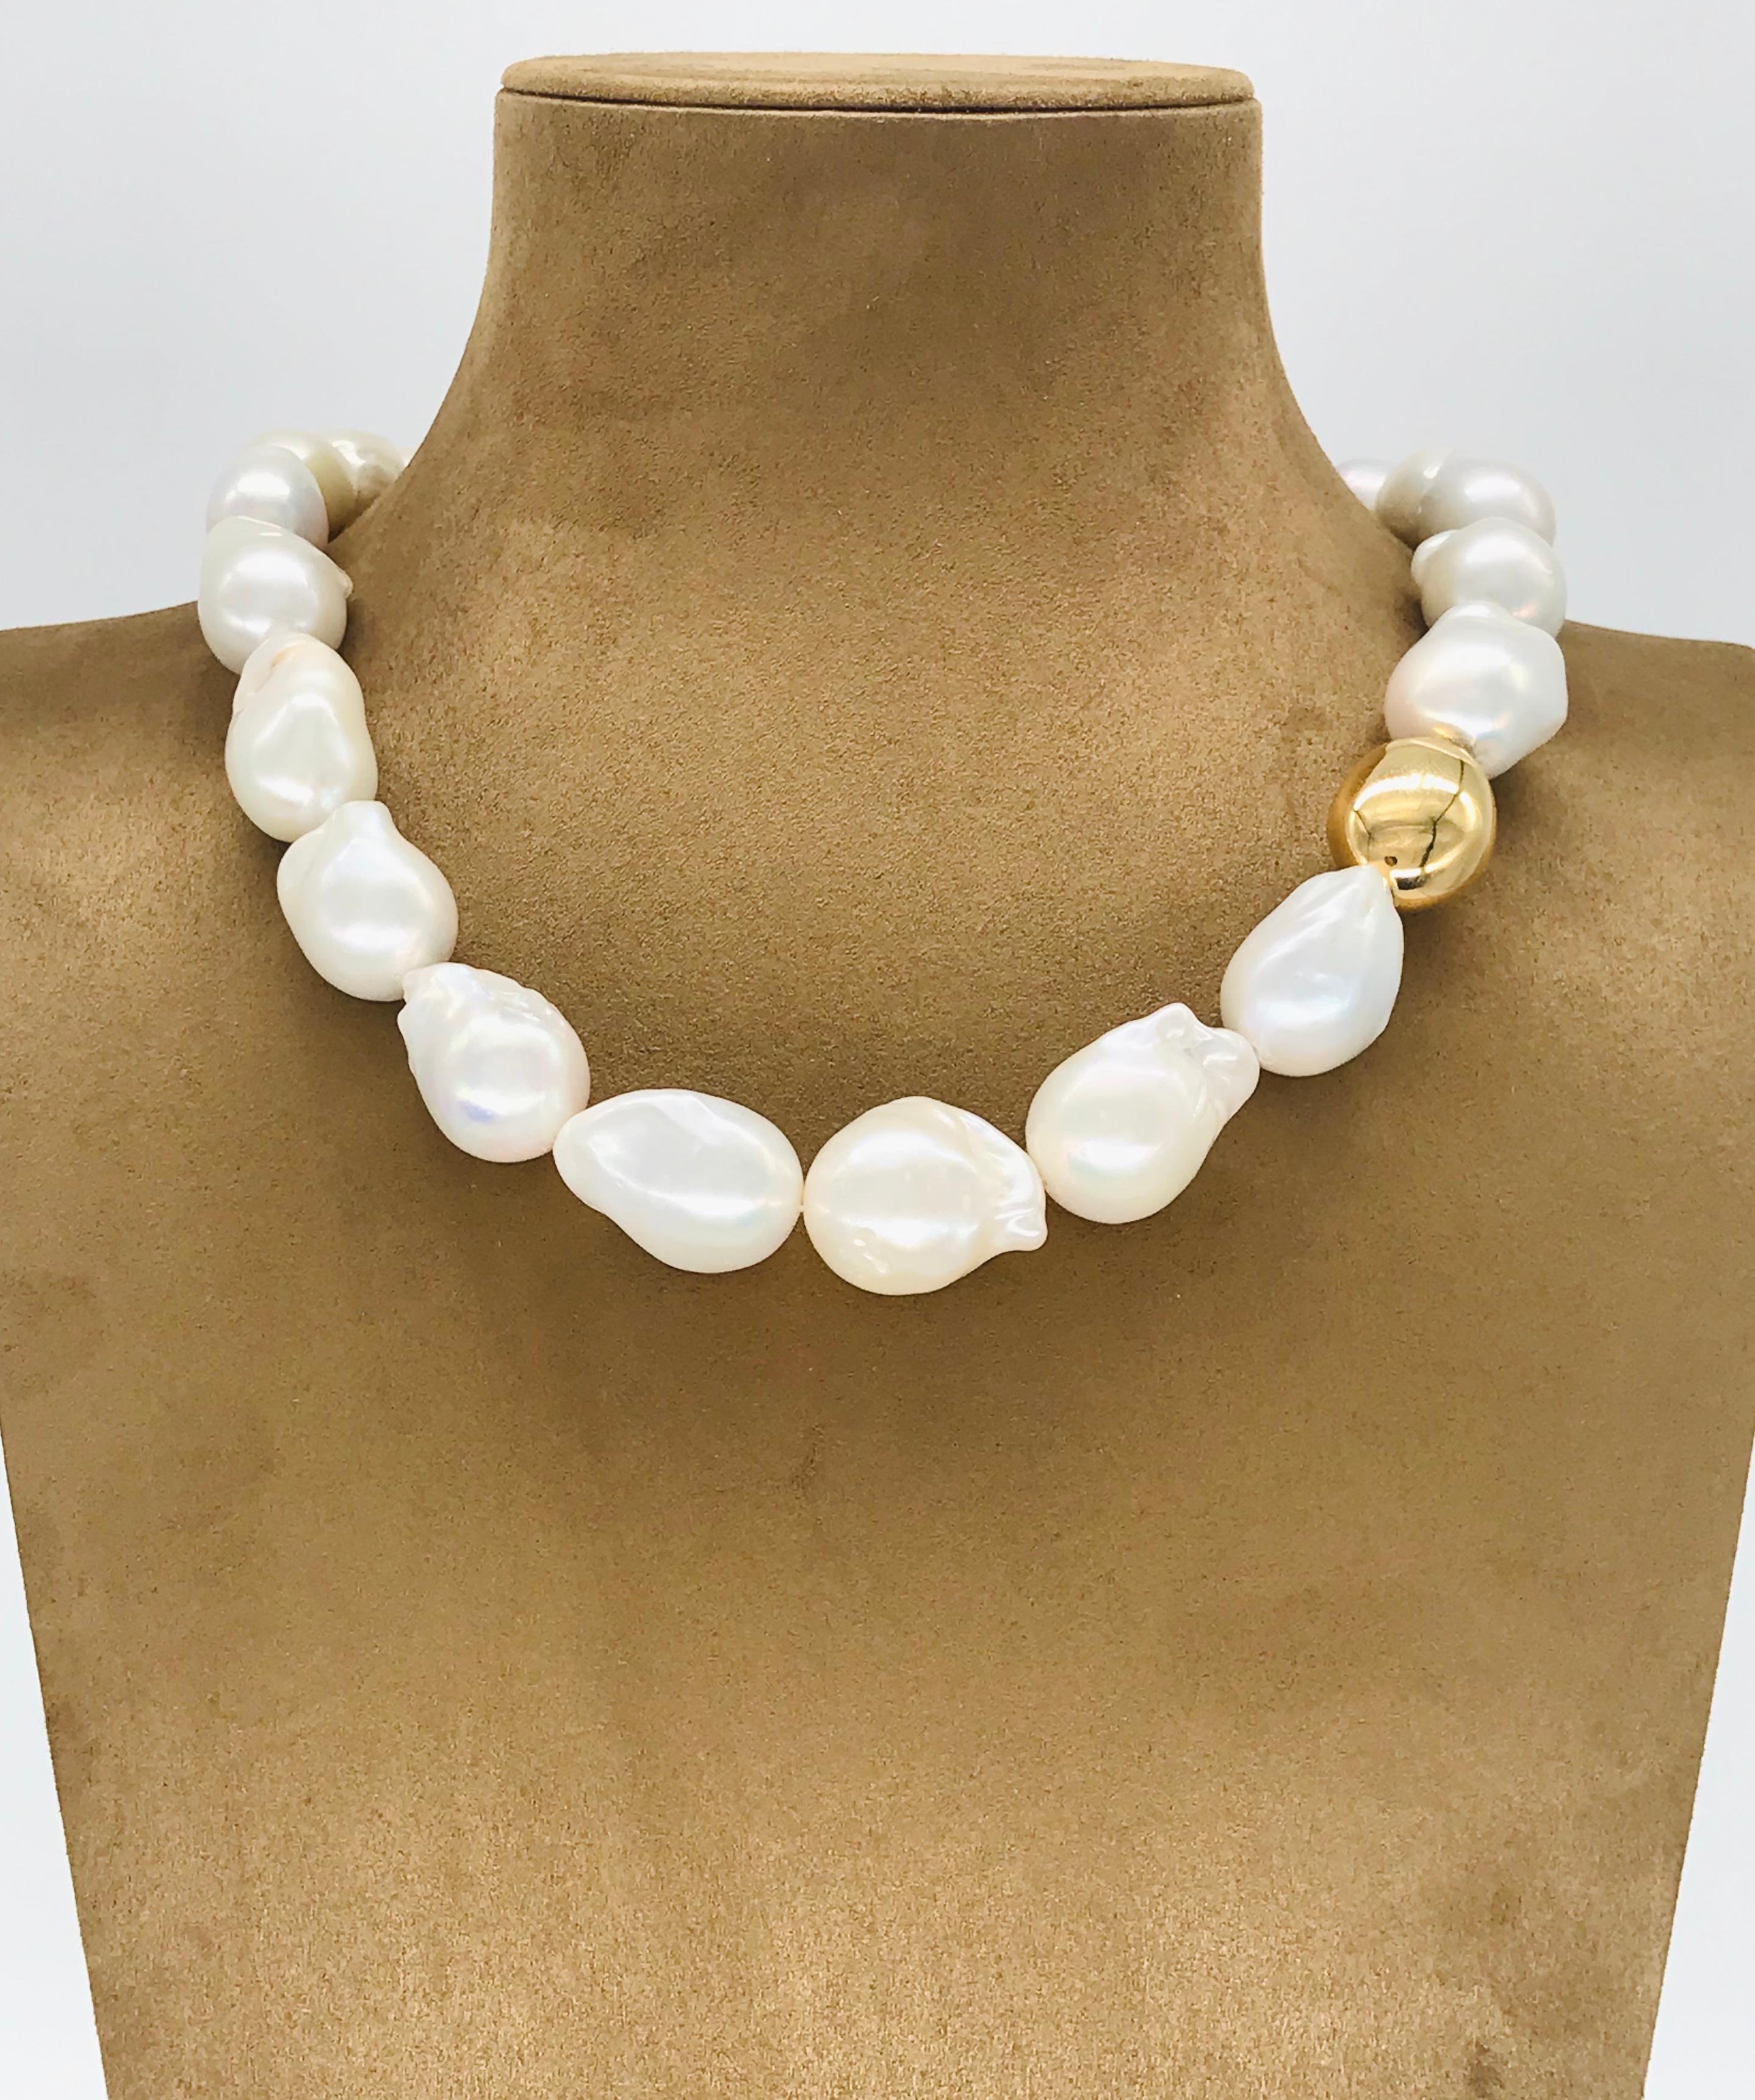 21 South Sea Baroque Pearls 
1 Yellow Gold Pearl Weight 2 grams 
Necklaces With Bakelite Clasp 
Length 50 cm / 19,685 inch
